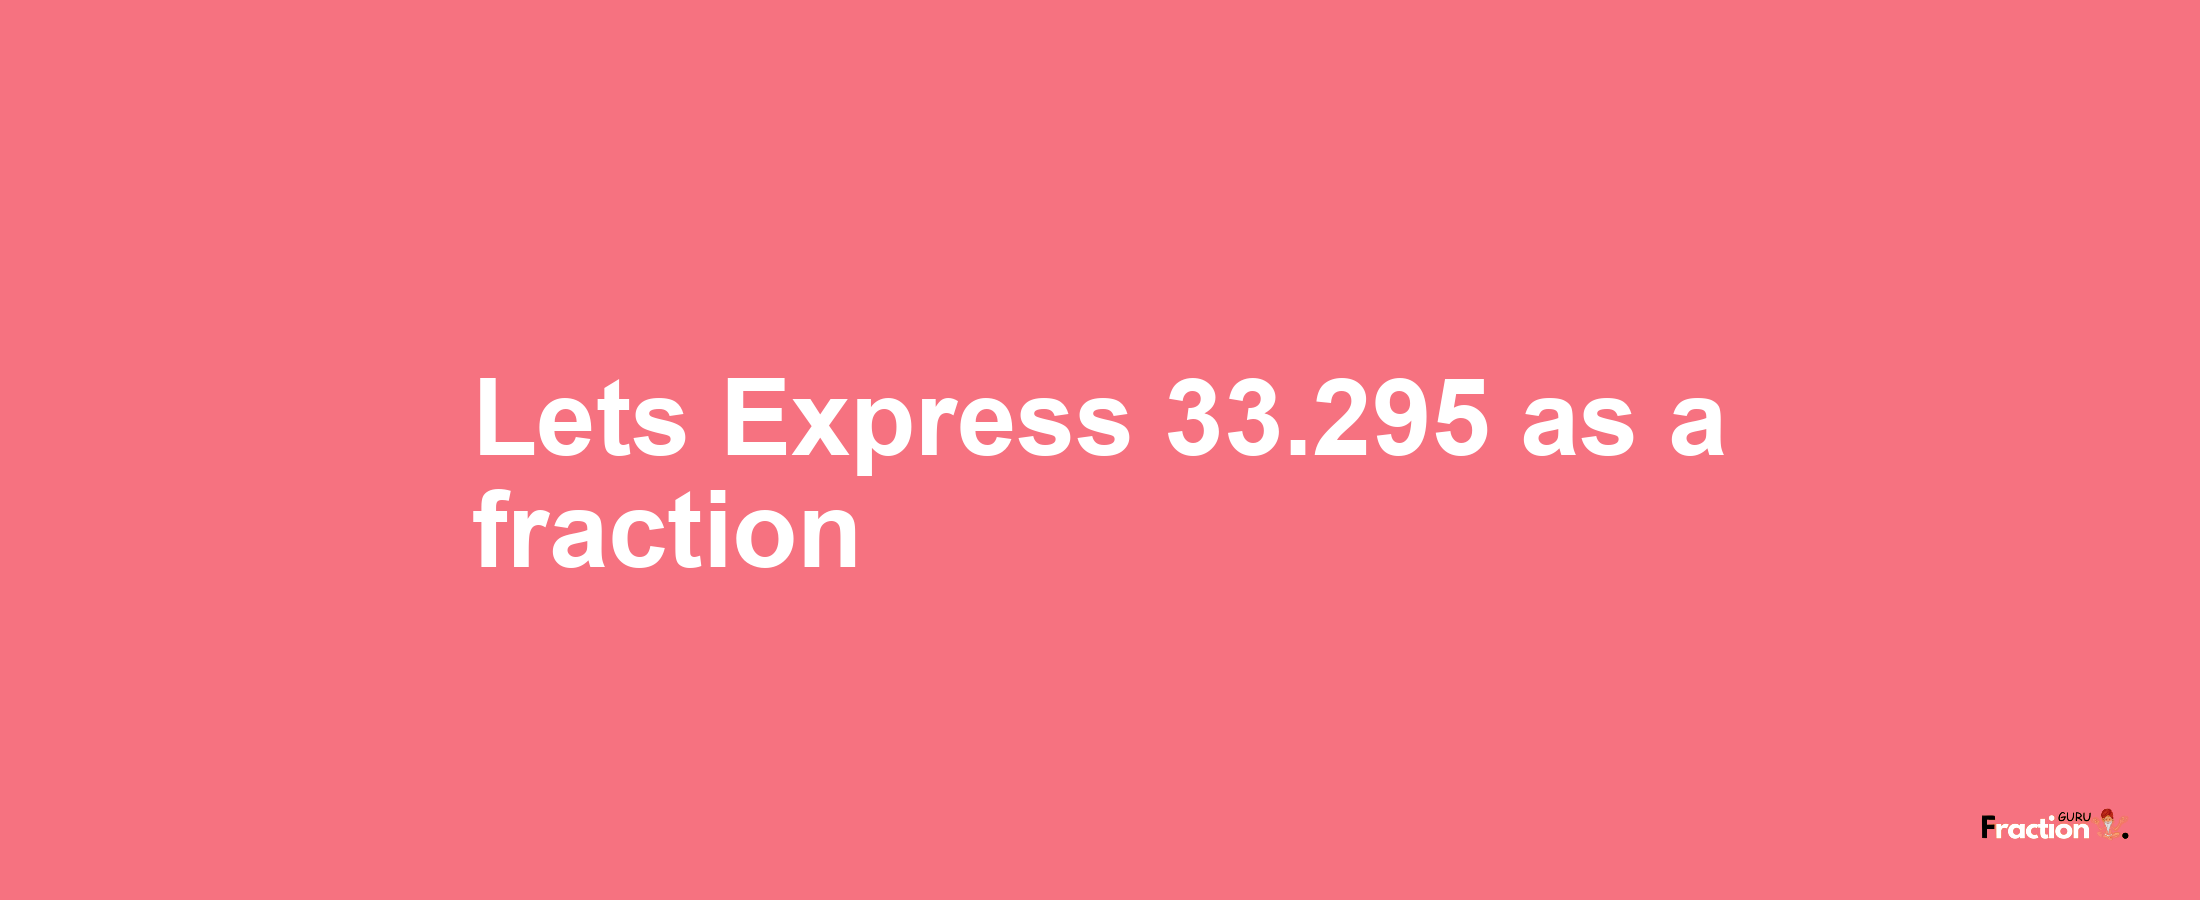 Lets Express 33.295 as afraction